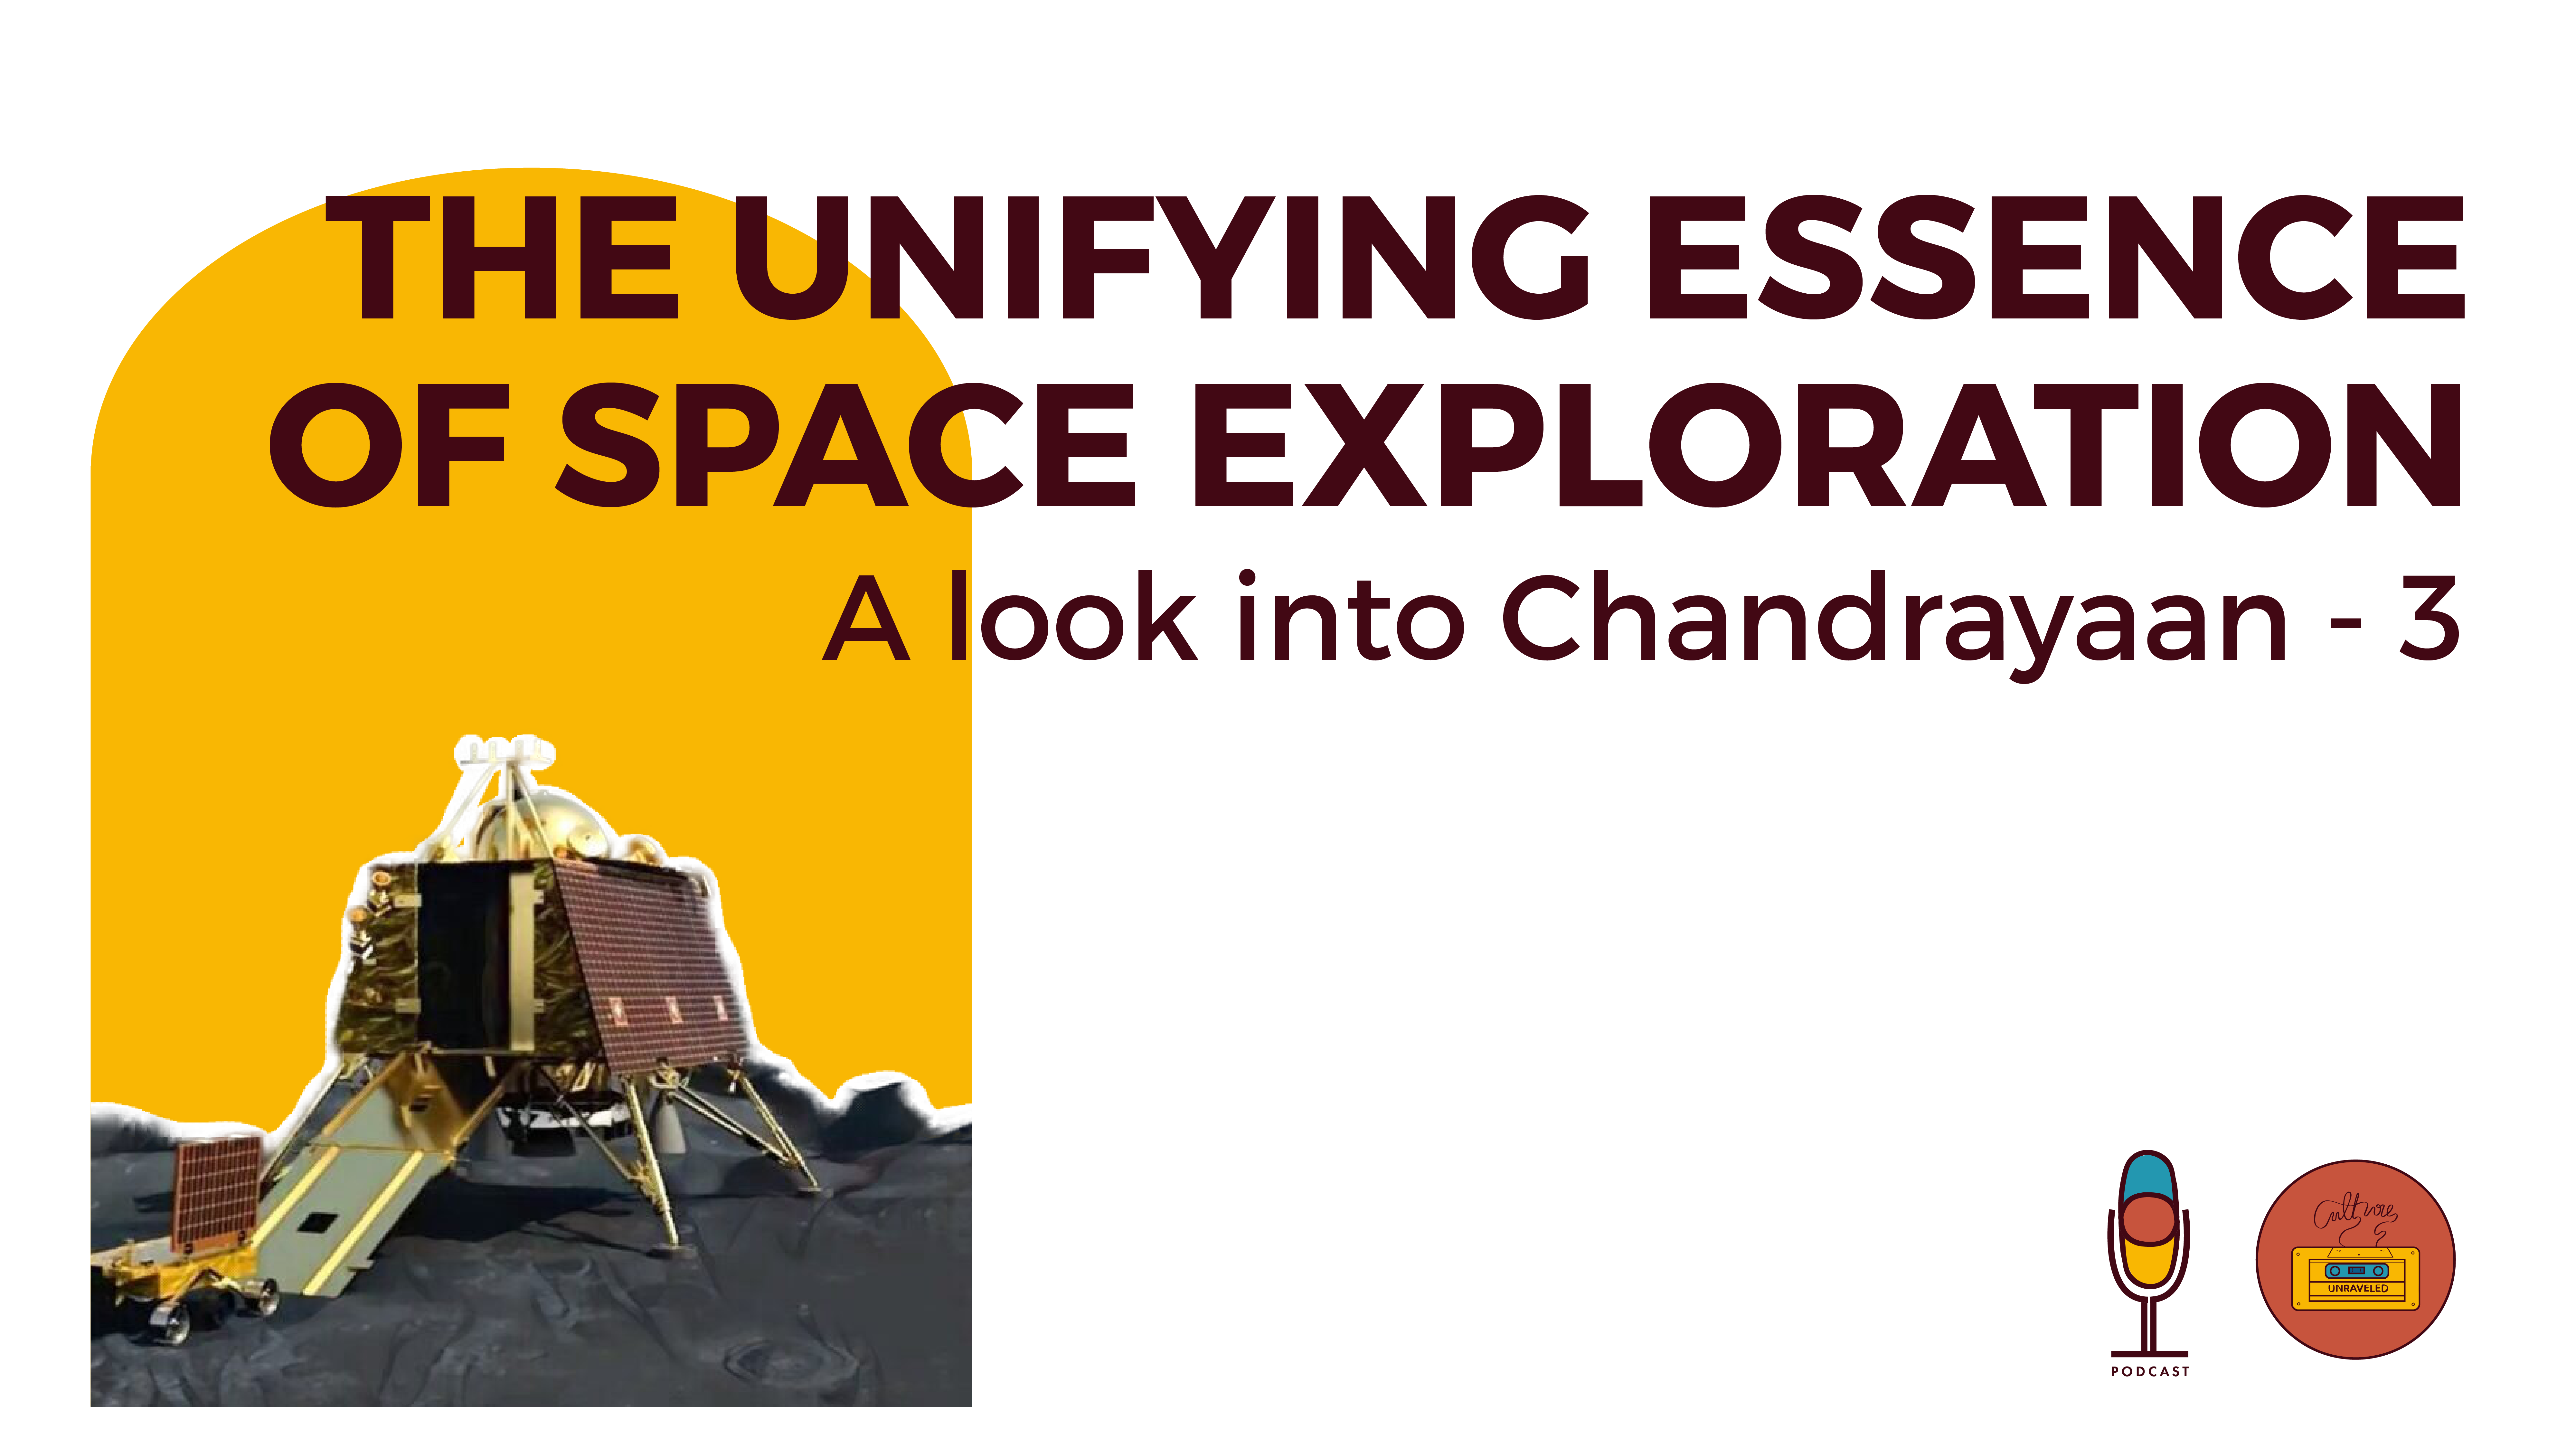 The Unifying Essence of Space Exploration. A Take on Chandrayaan-3